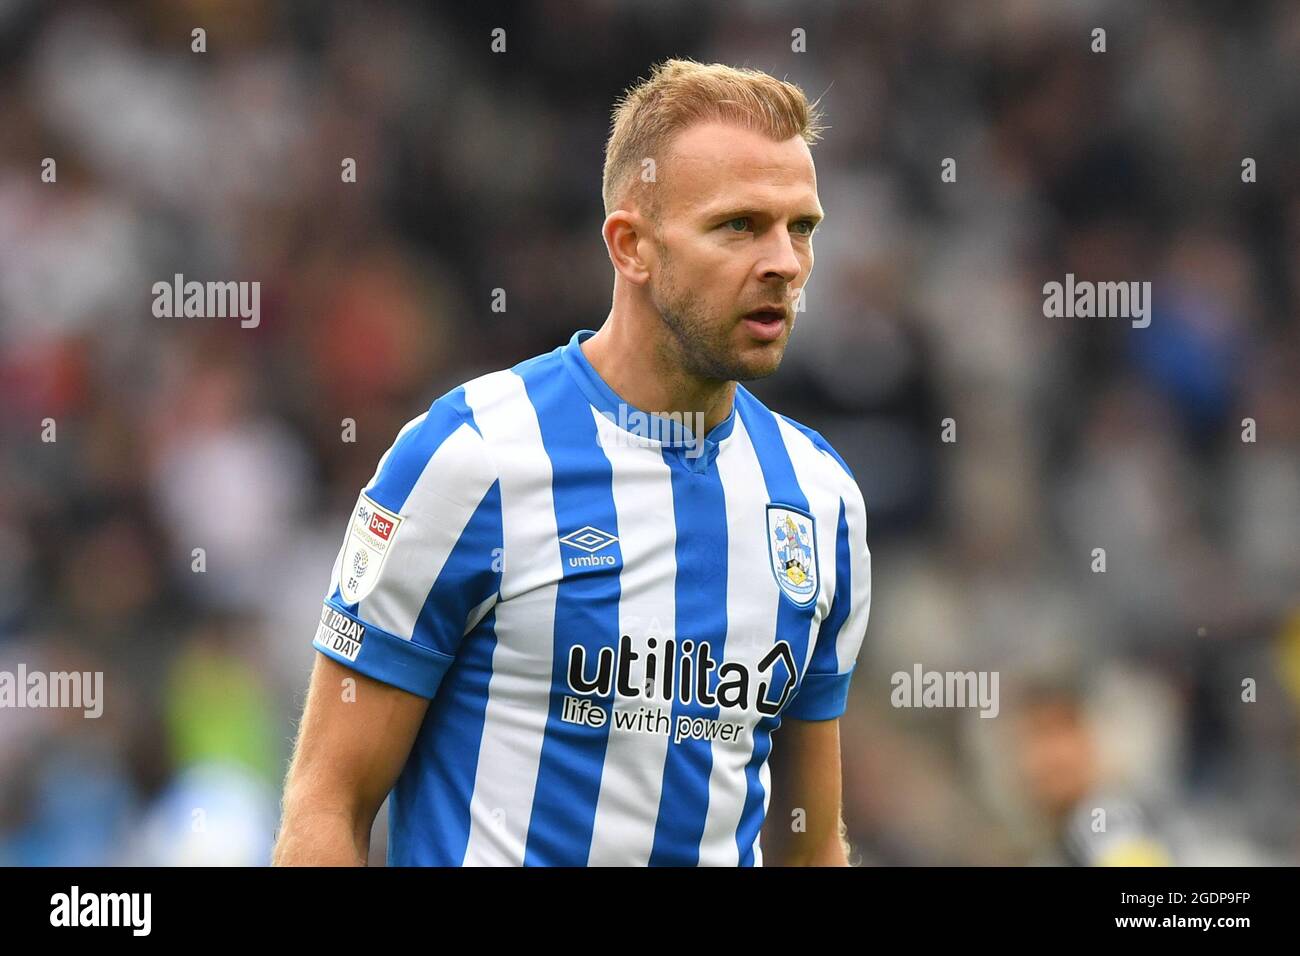 Jordan Rhodes #9 of Huddersfield Town during the game Stock Photo - Alamy